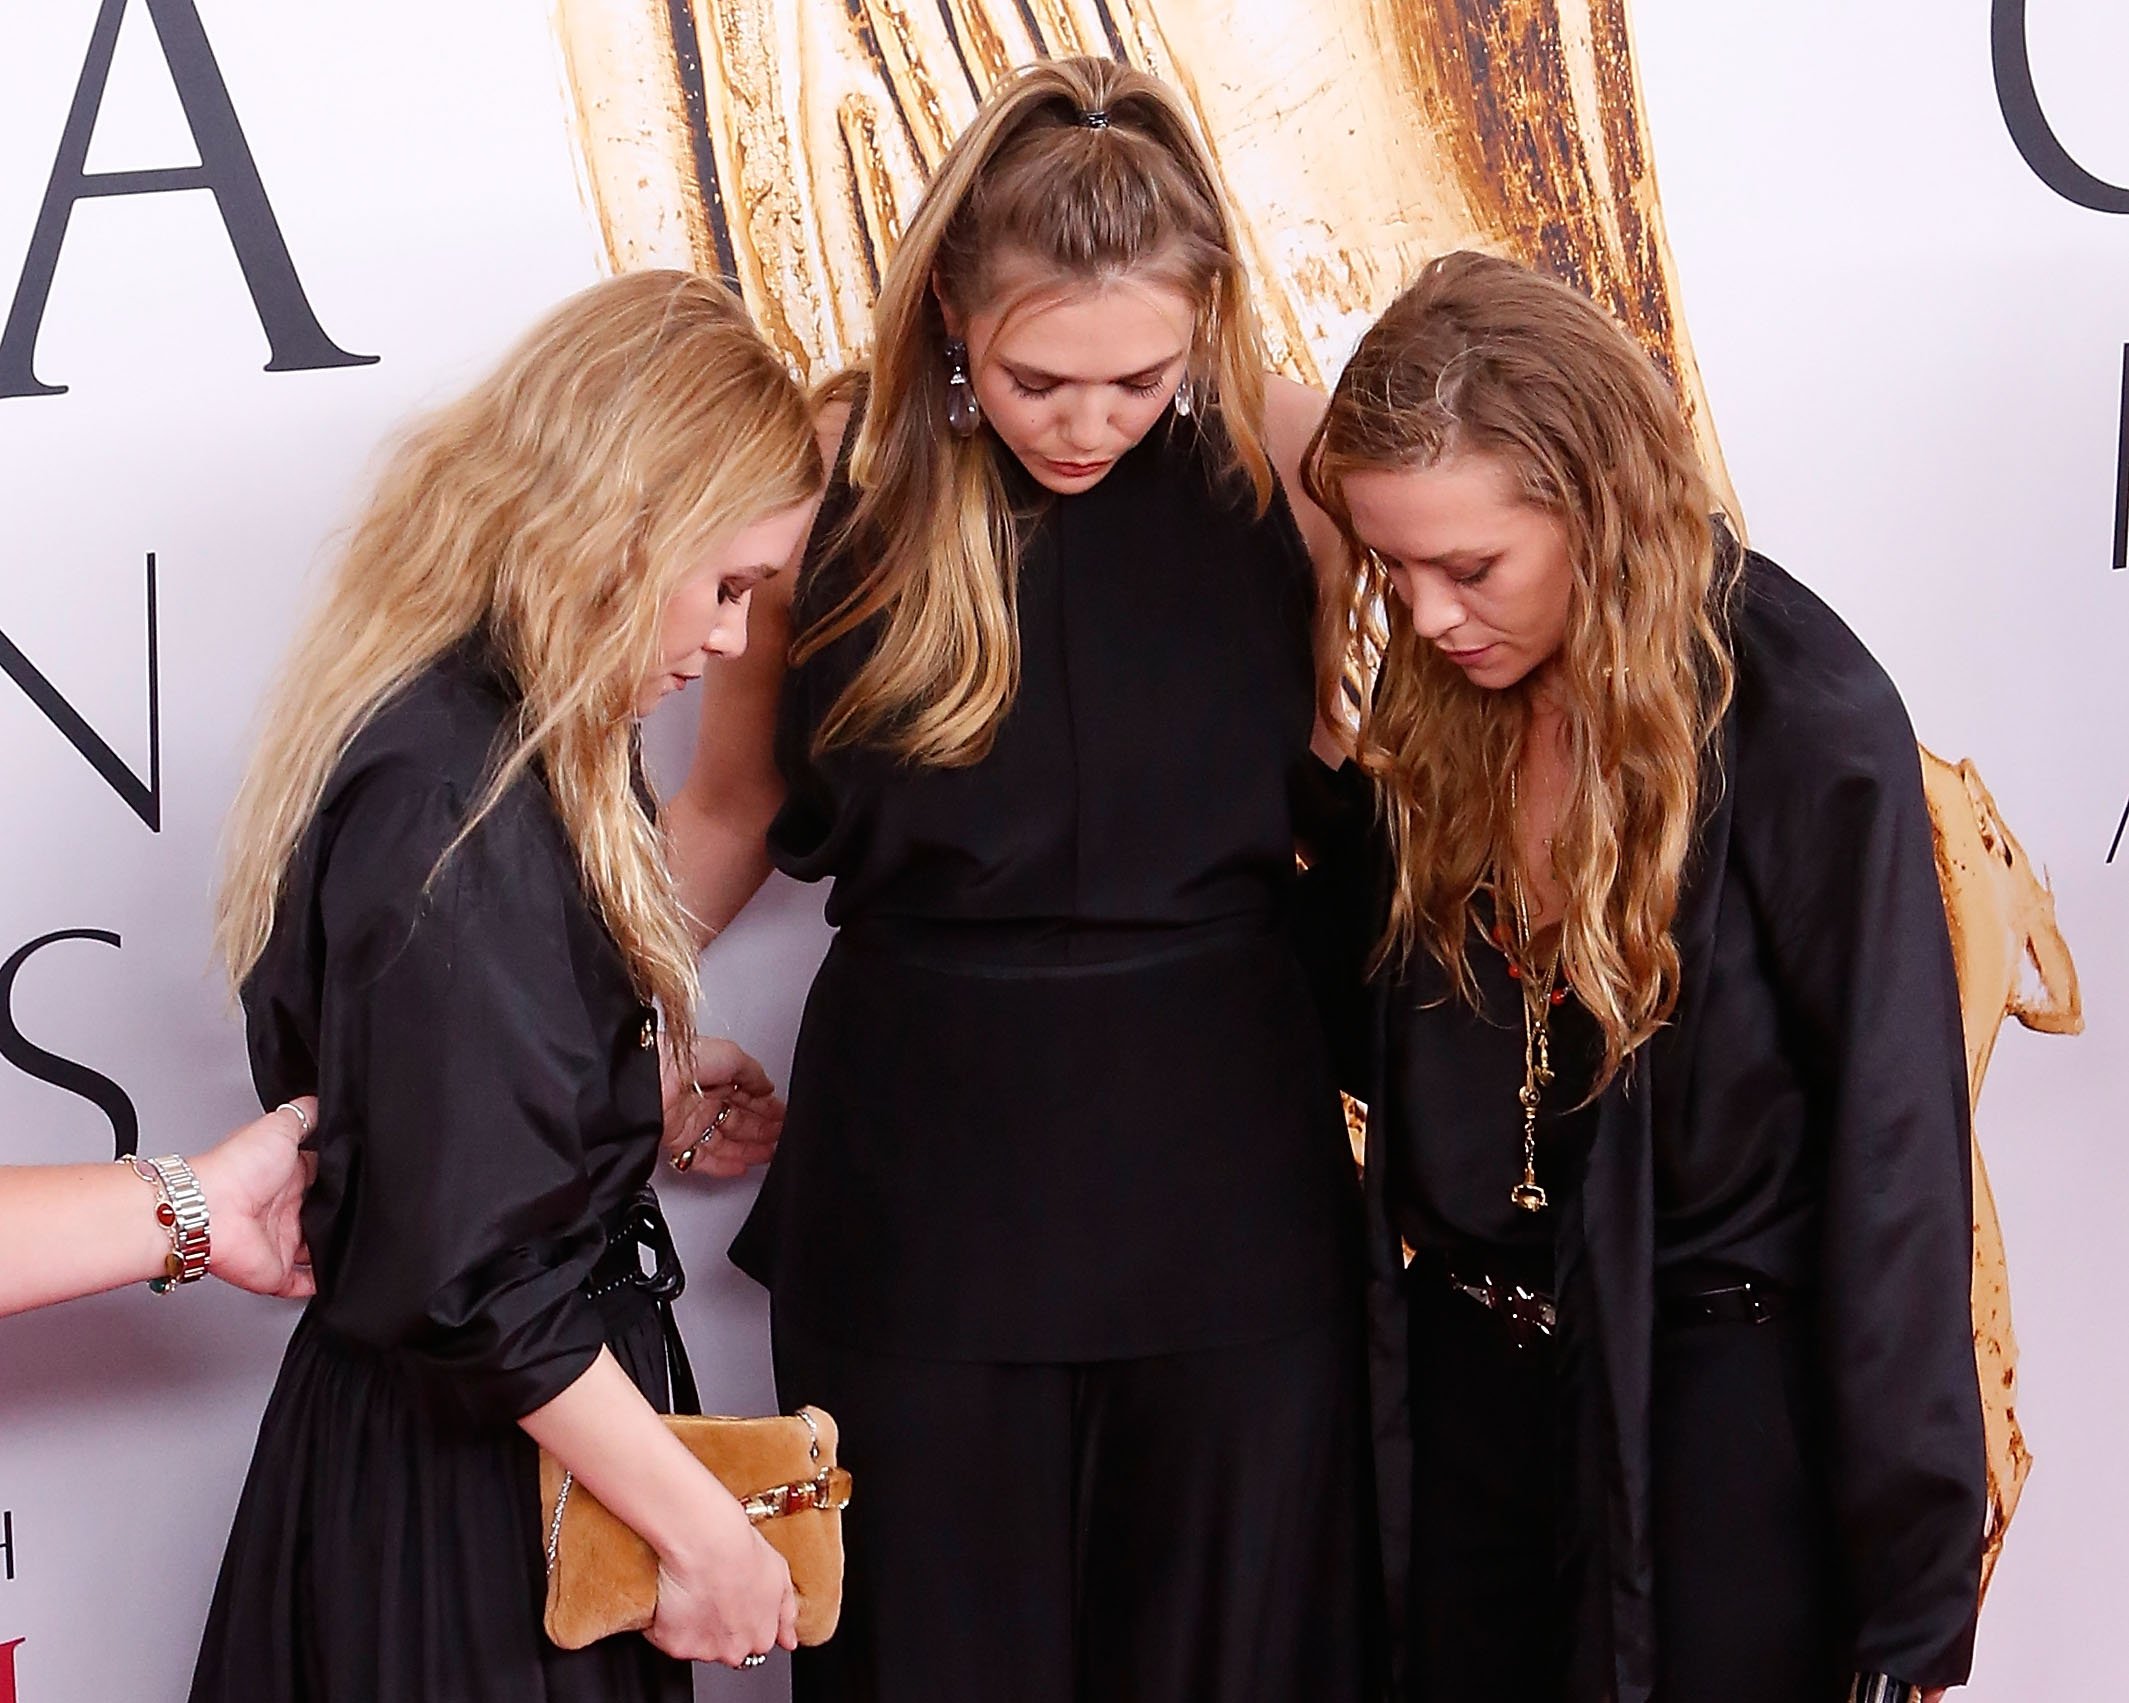 Emmys 2021: ‘WandaVision’ Star Elizabeth Olsen’s Sisters Mary-Kate and Ashley Have Never Been Nominated, So She Brought Them With Her For Her Emmy Debut…Sort Of